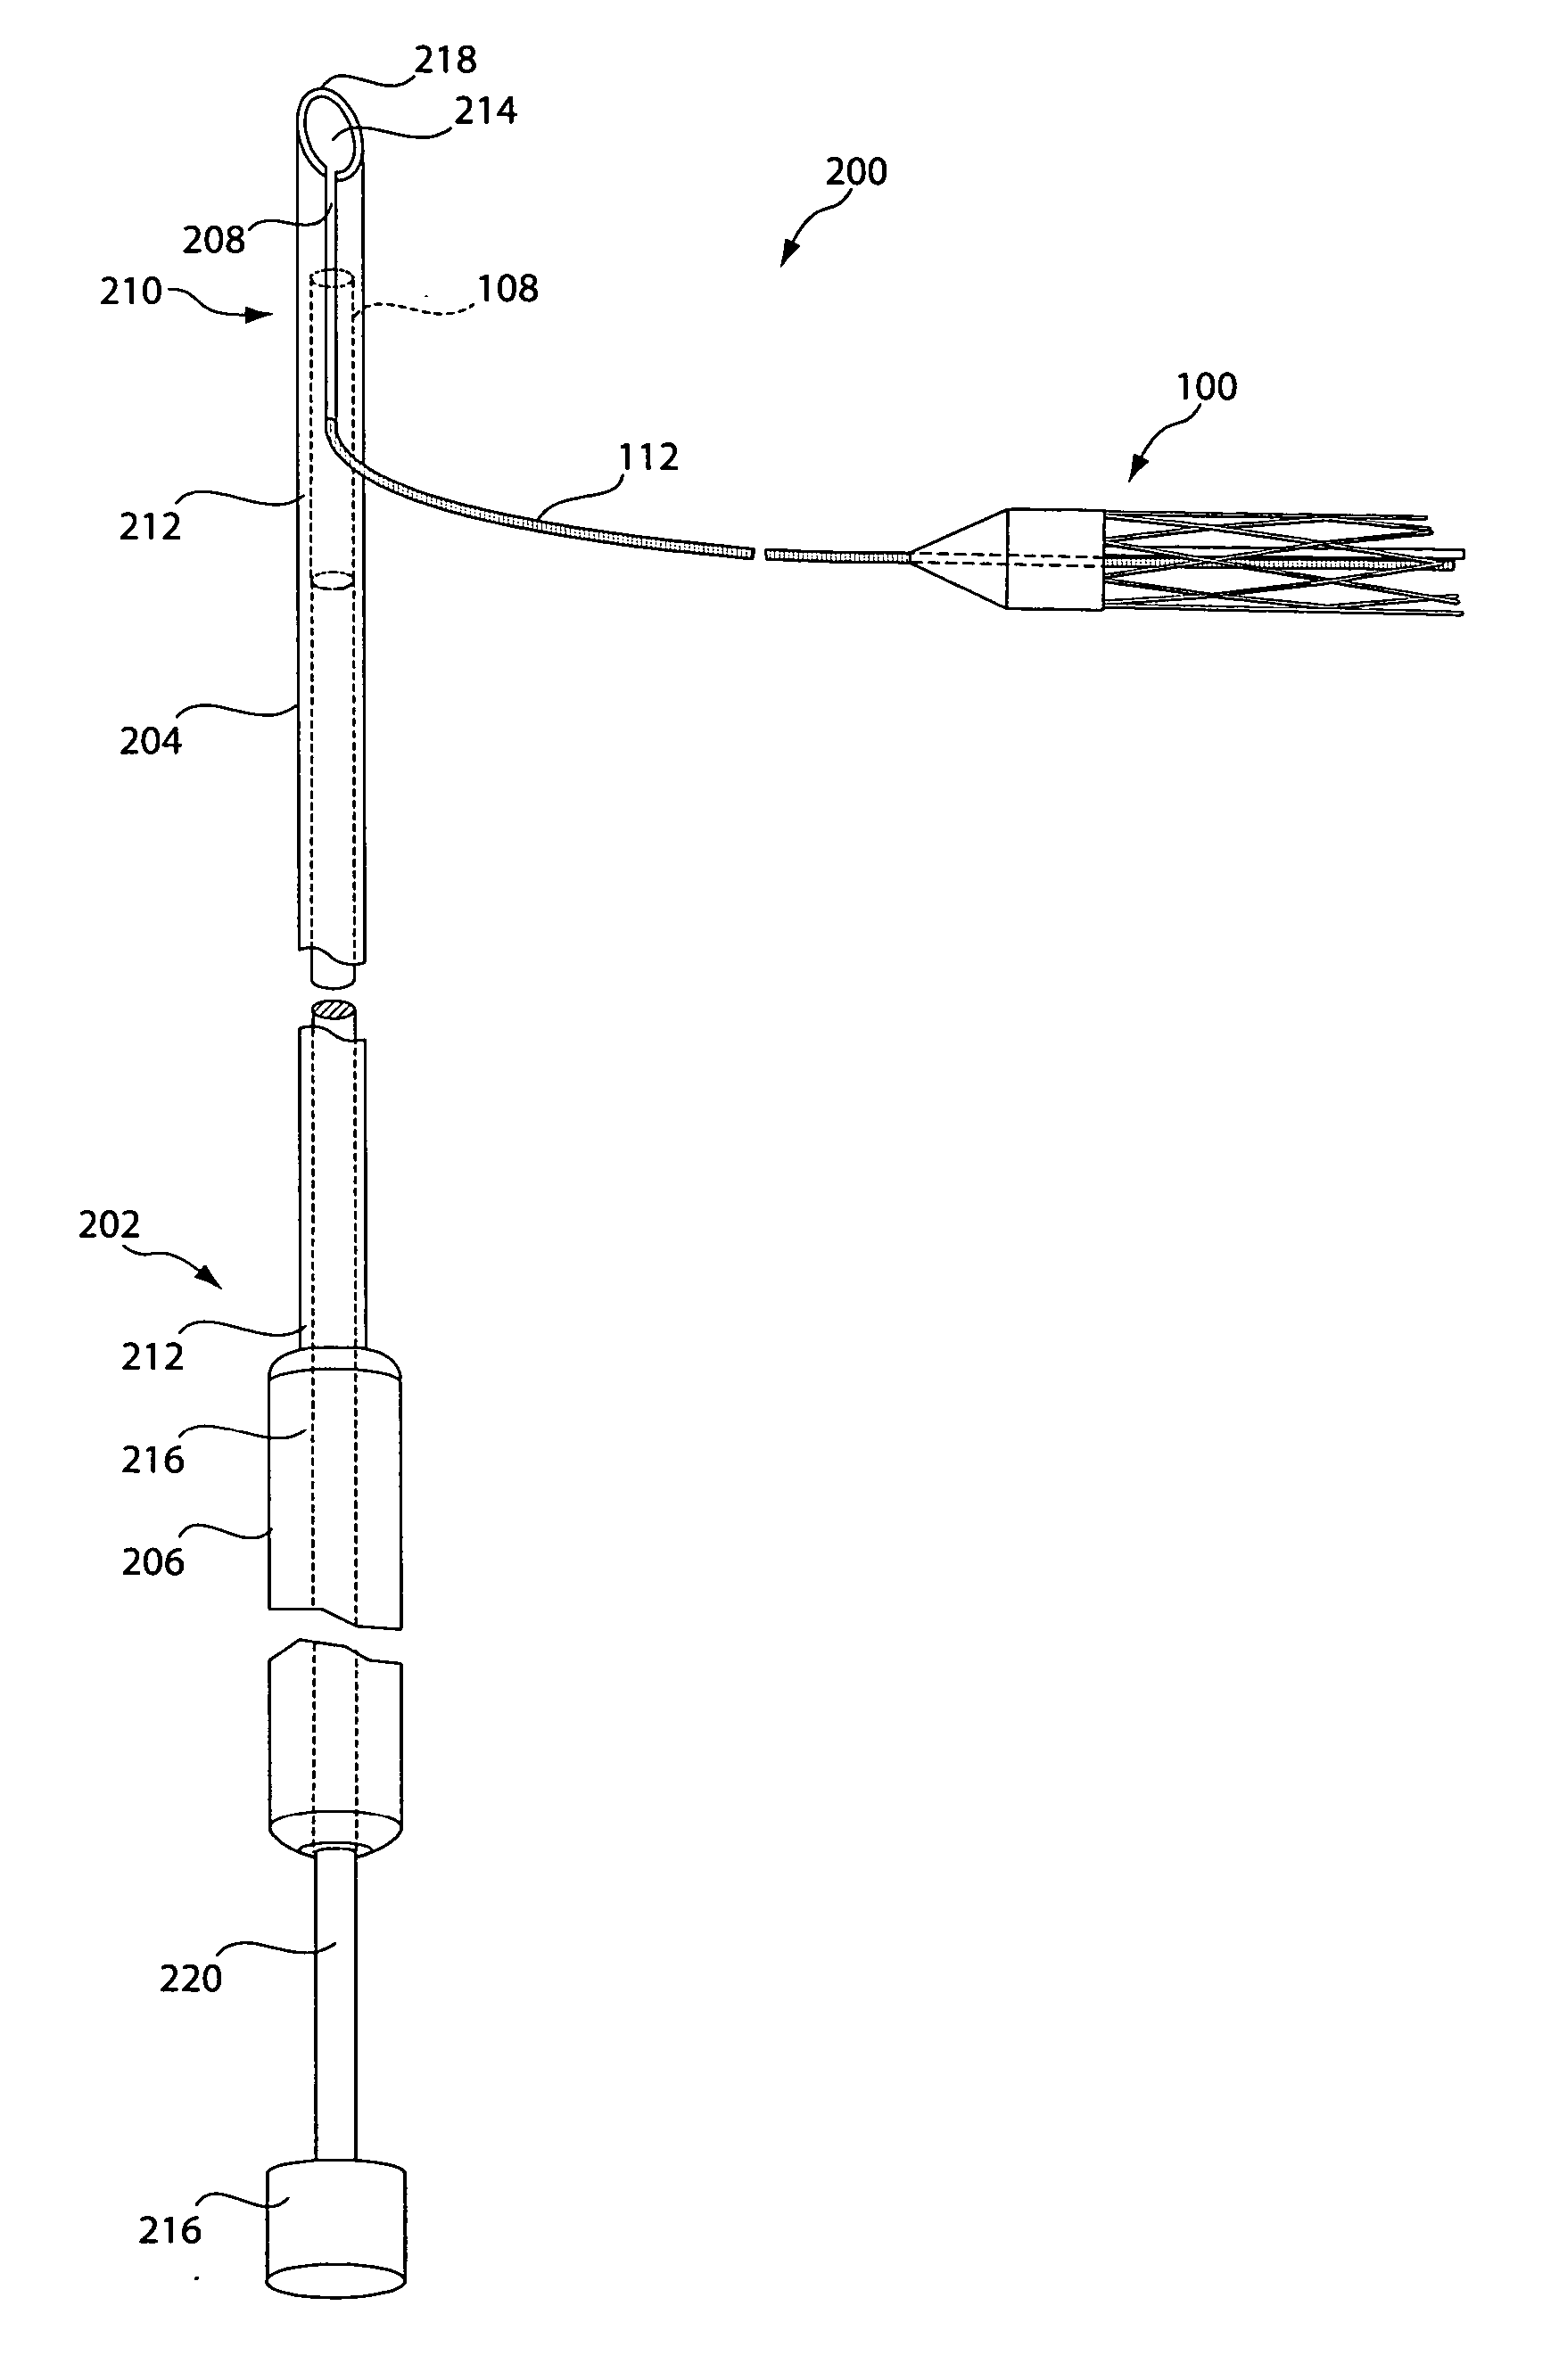 Tubular implantable sling and related delivery systems, methods and devices